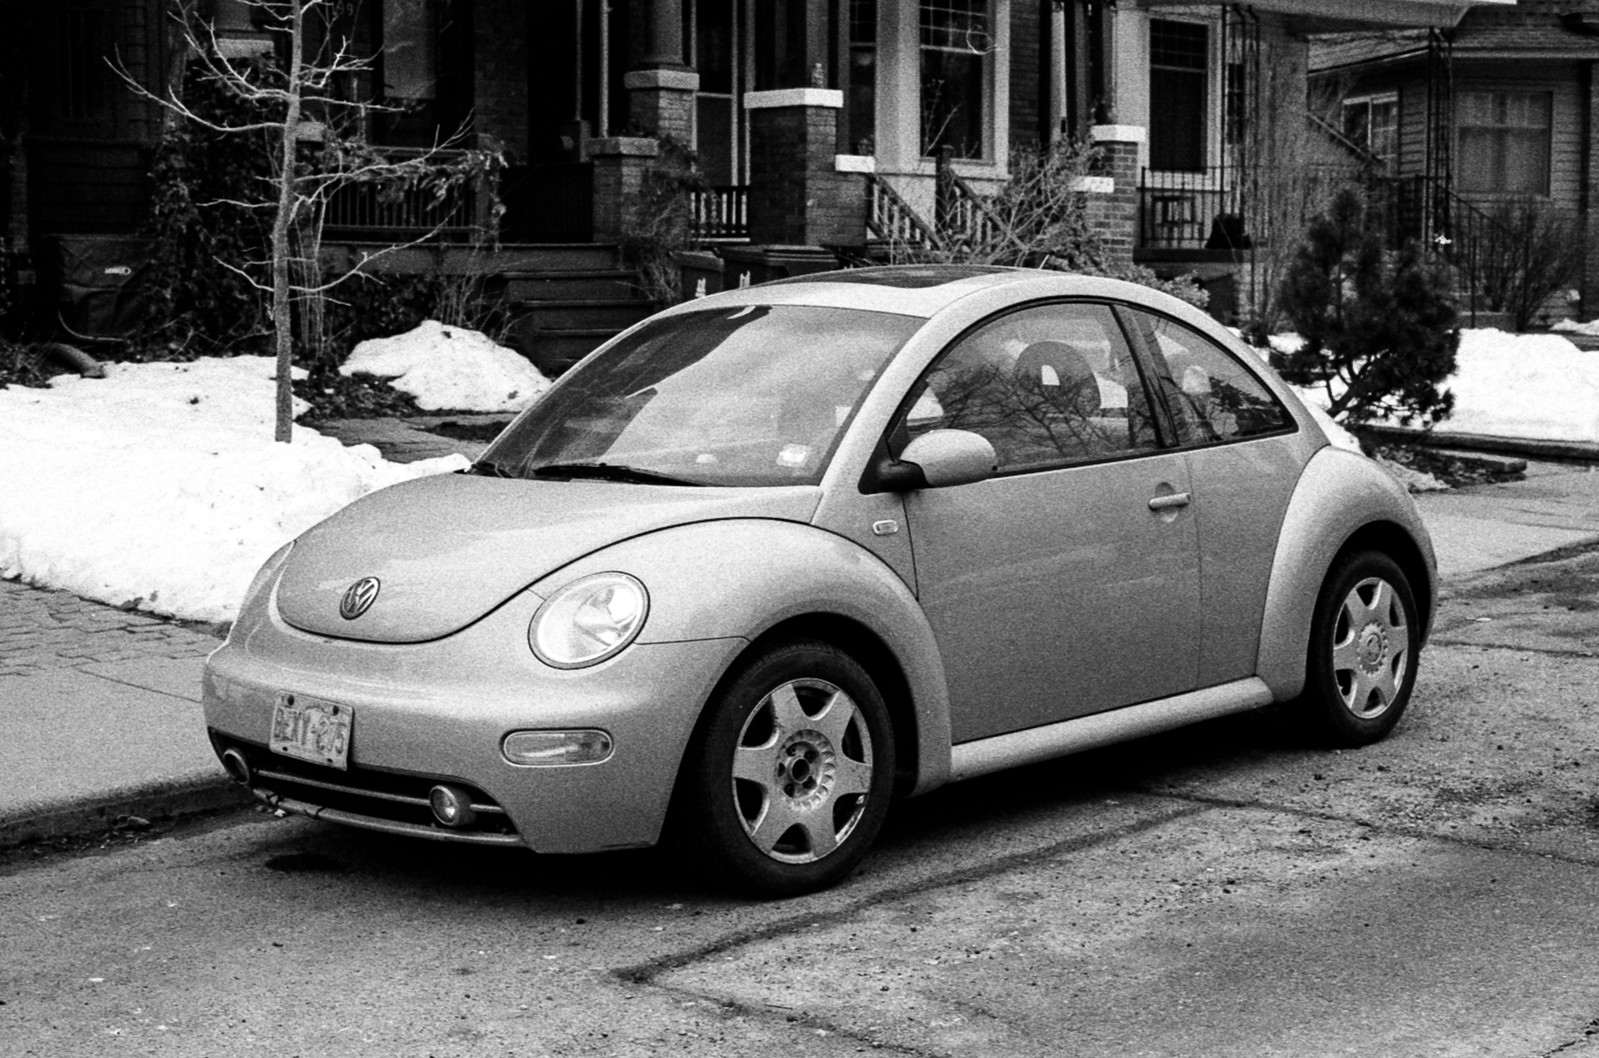 Late 1990s Punch Buggy